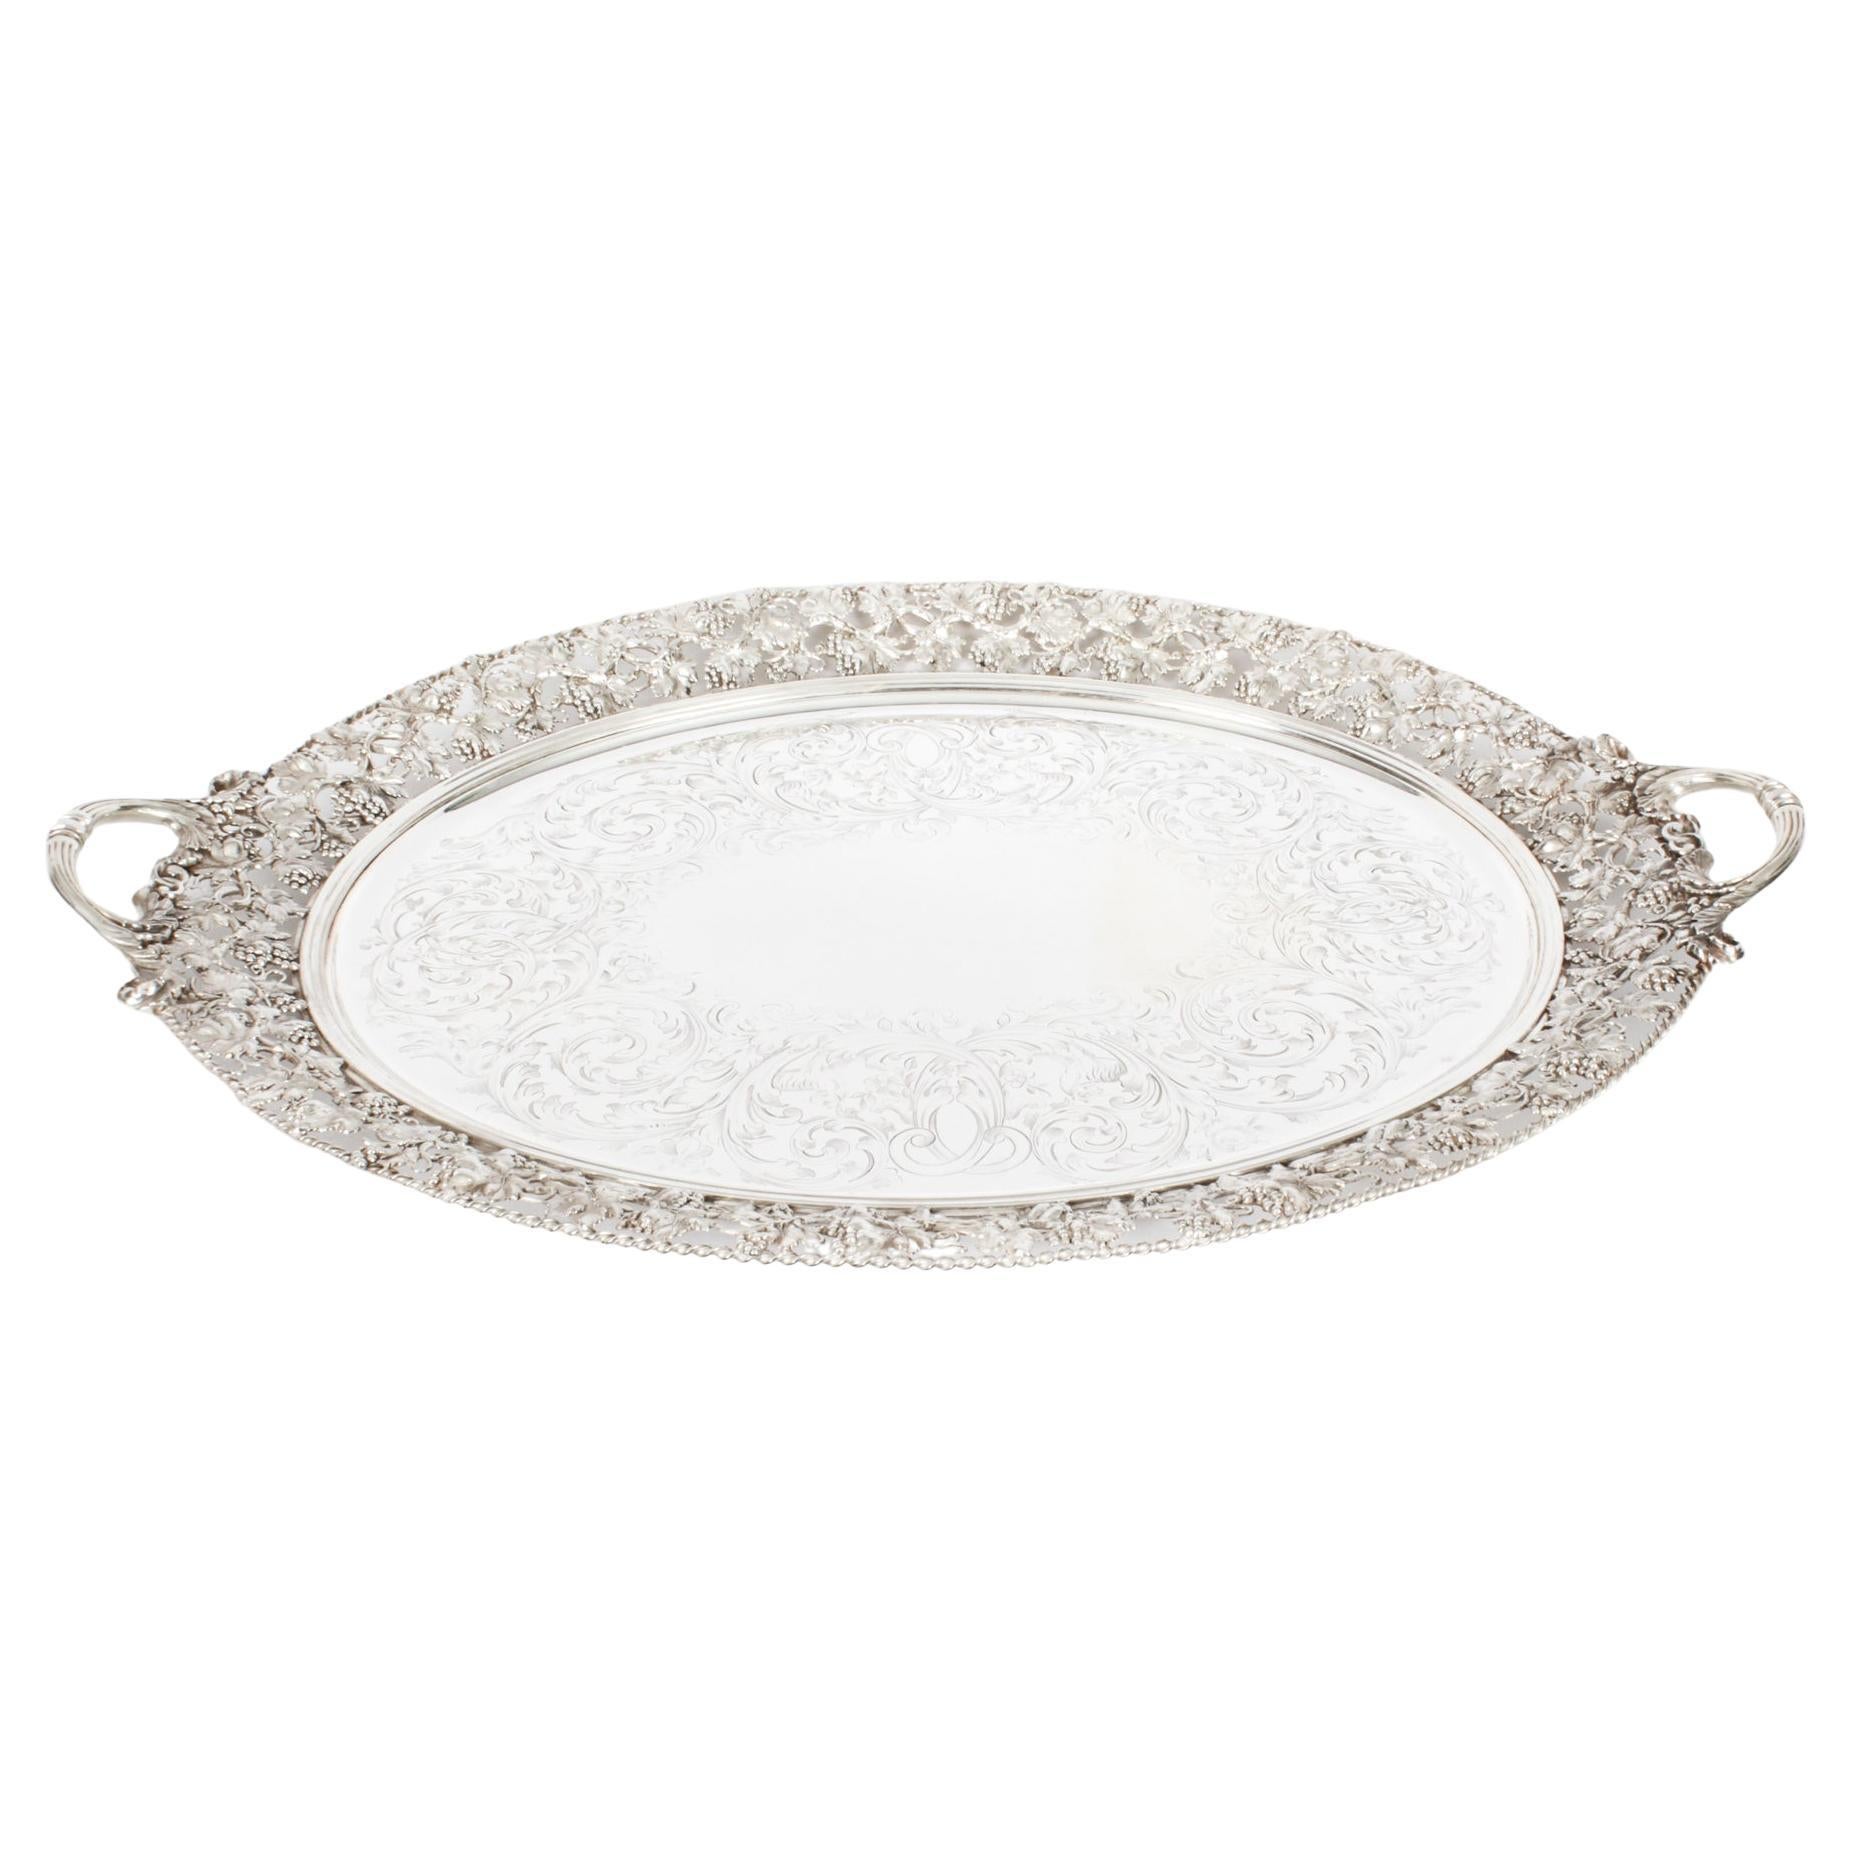 Antique Monumental Victorian Oval Silver Plated Tray 19th Century For Sale